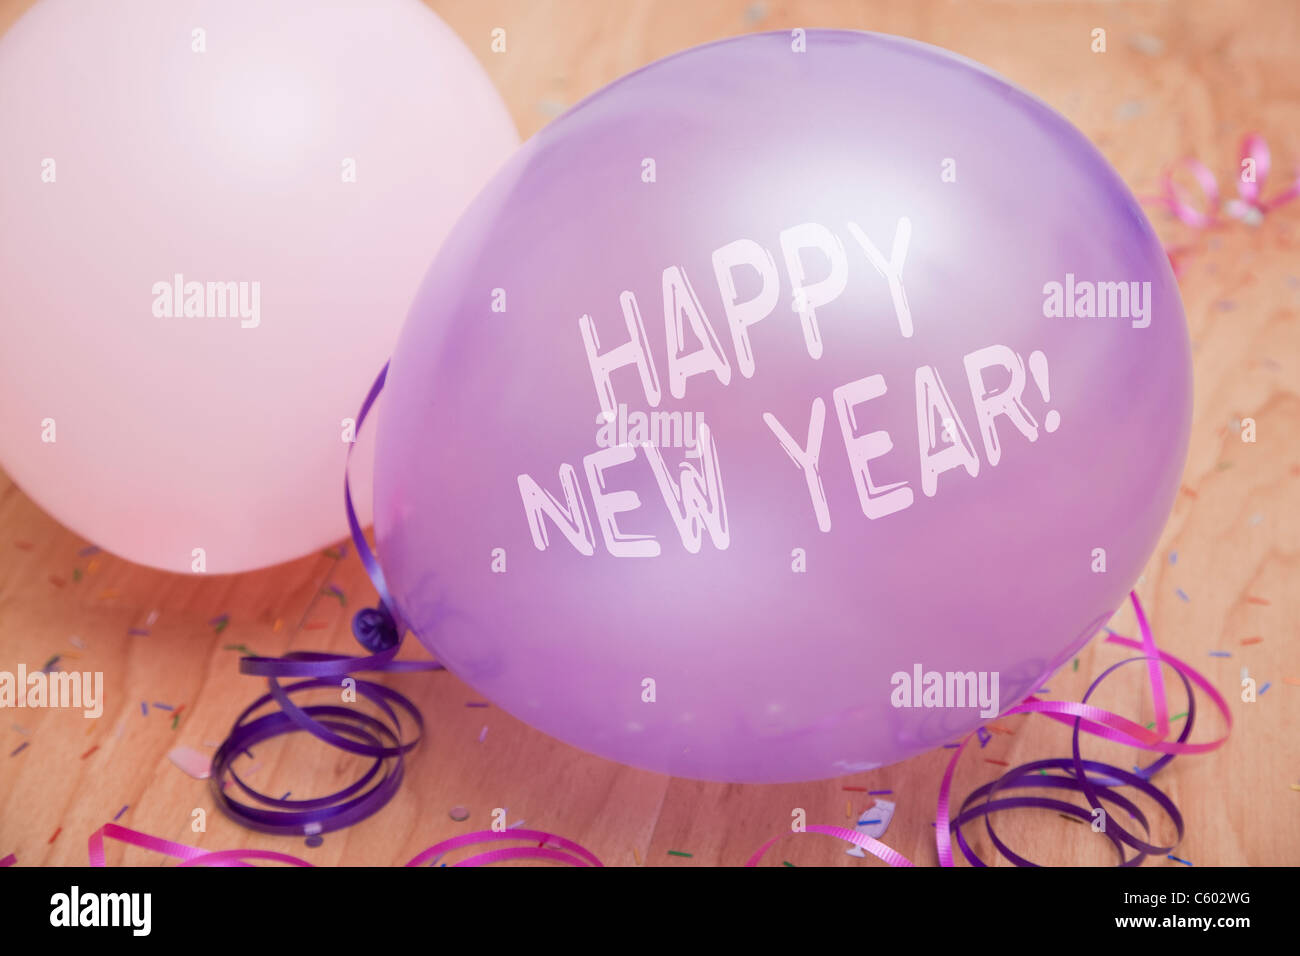 USA, Illinois, Metamora, close up of new year's eve party balloons Stock Photo